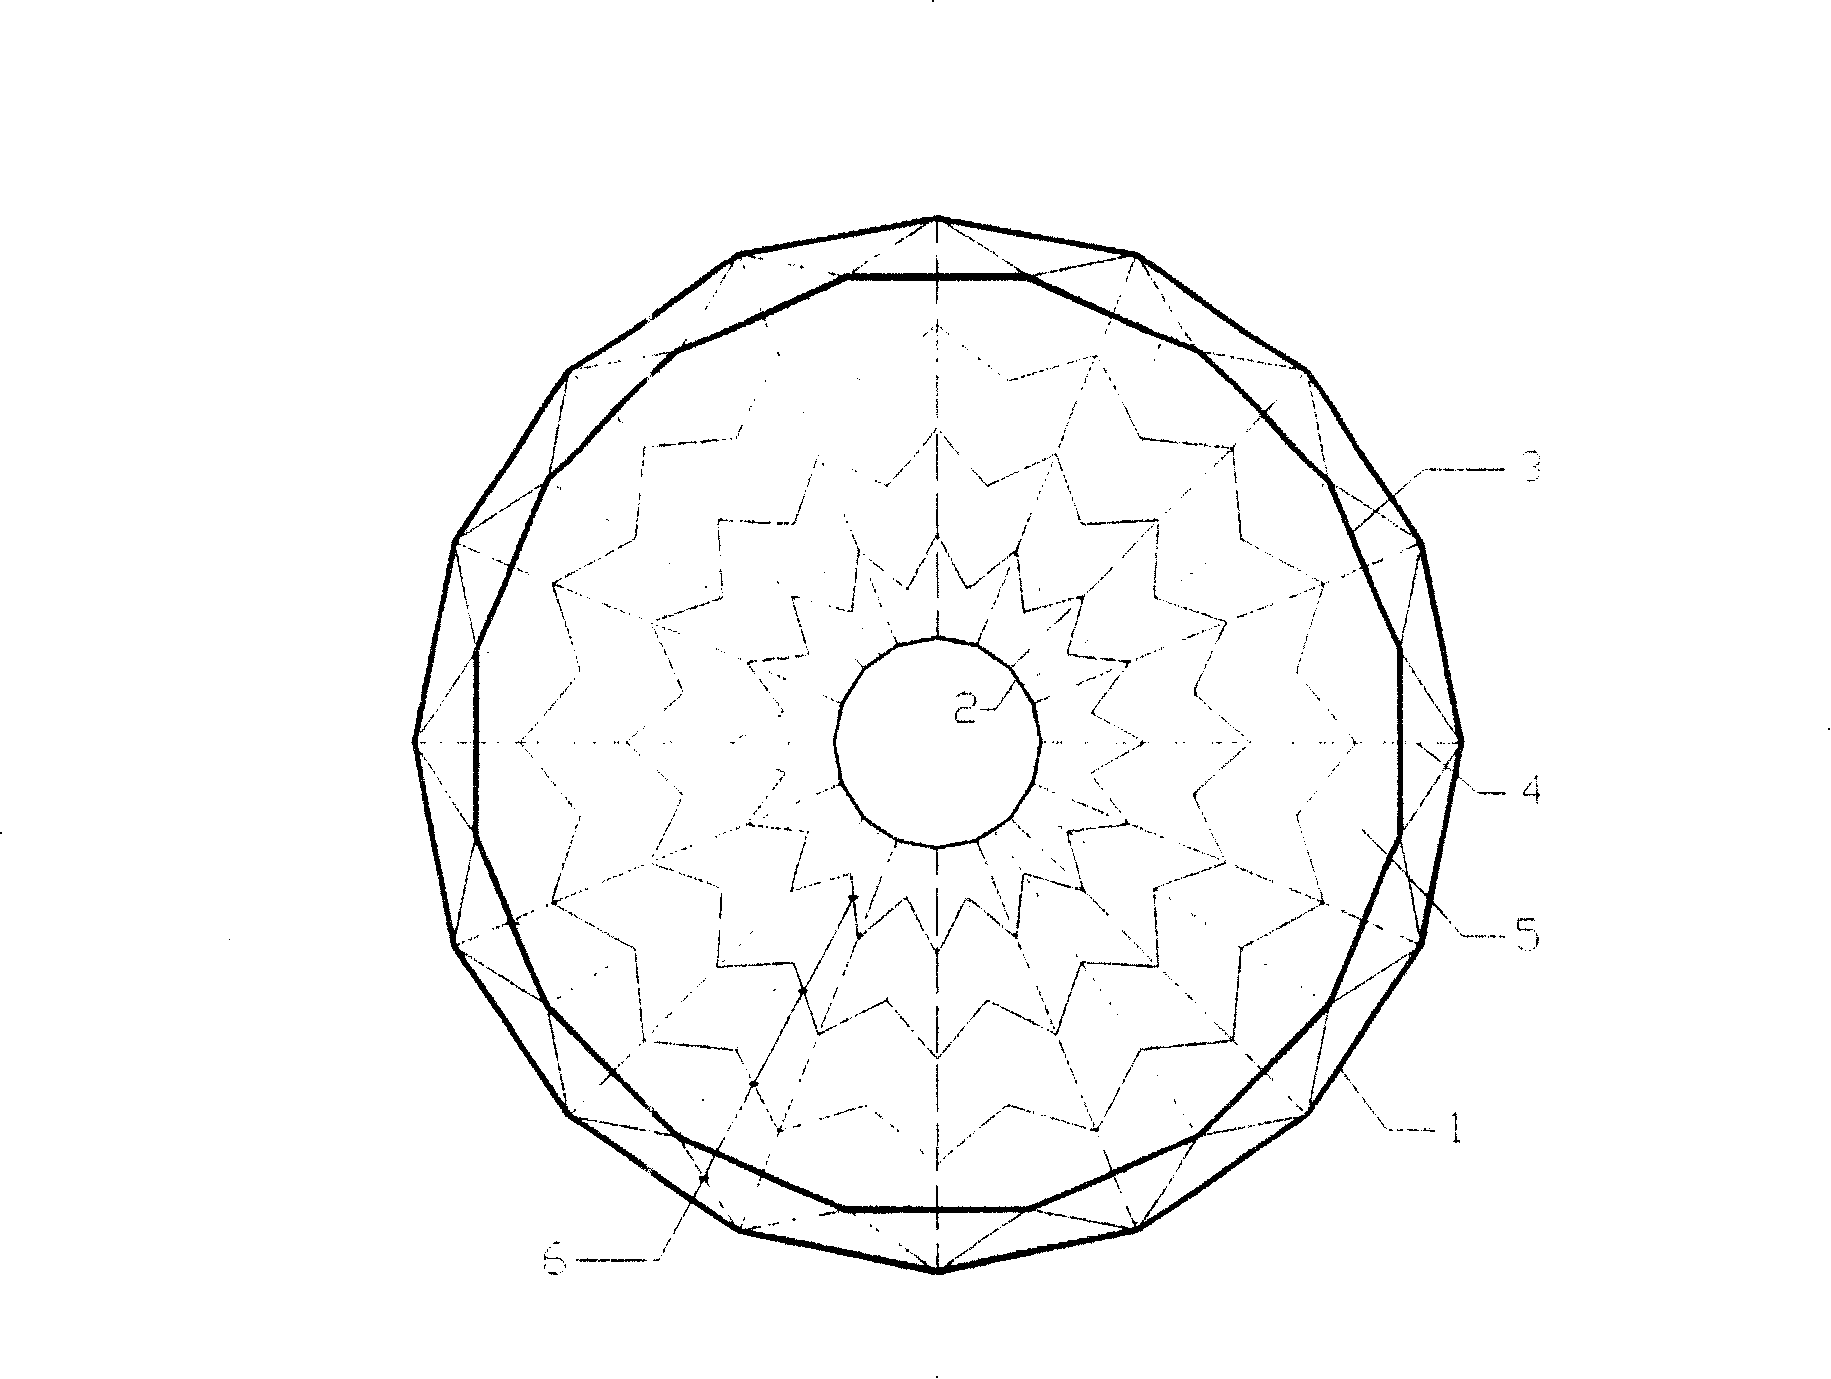 Folding plate type rope disc structure